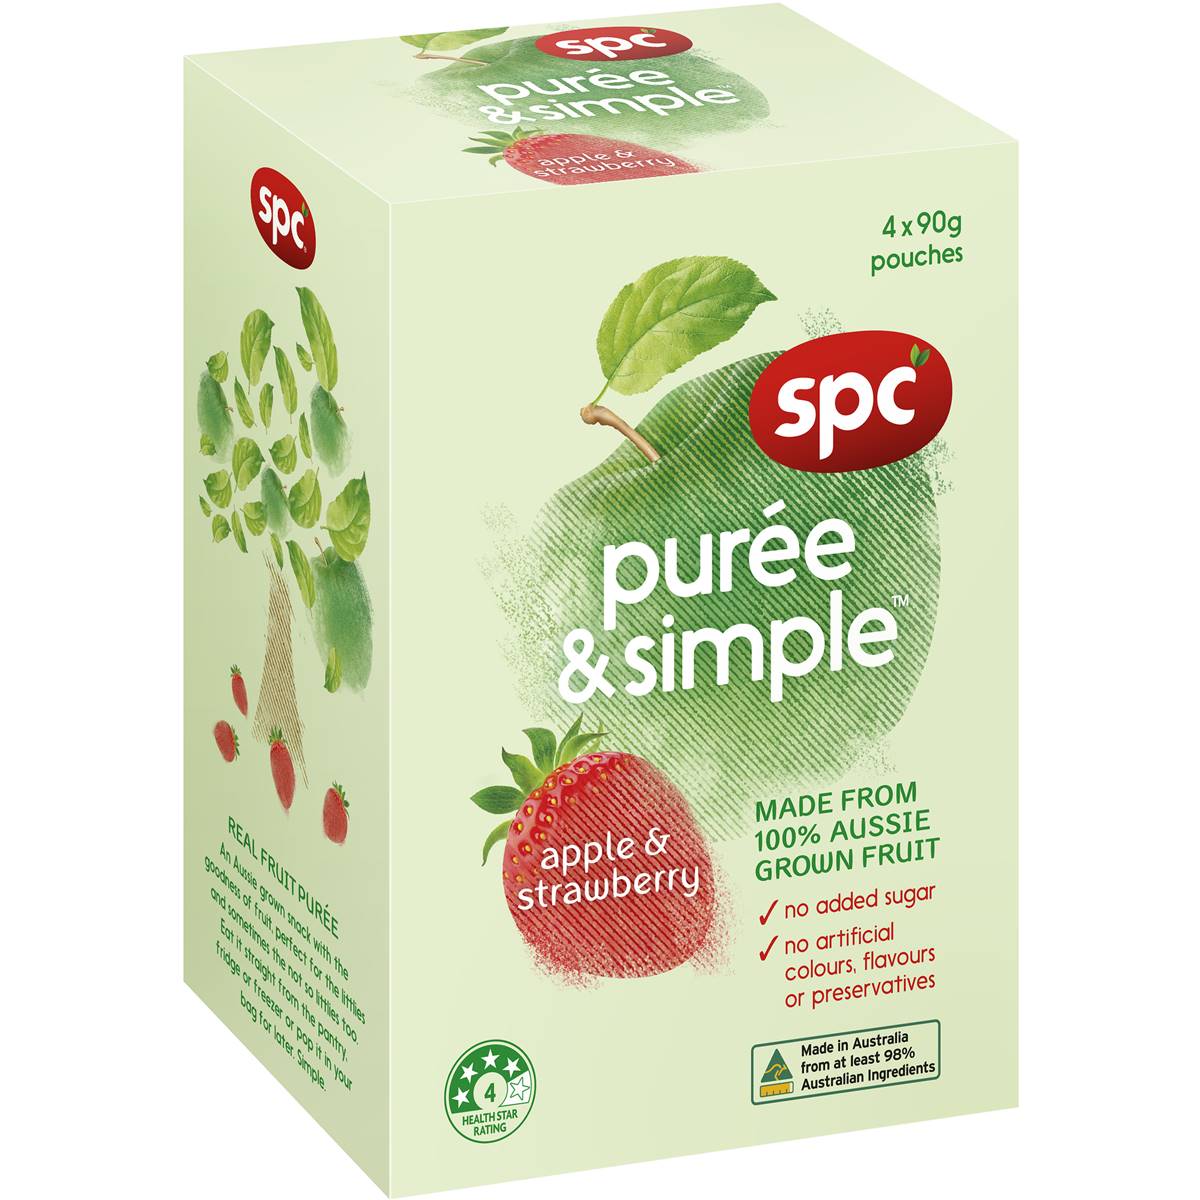 Calories in Spc Puree & Simple Apple & Strawberry Pouches